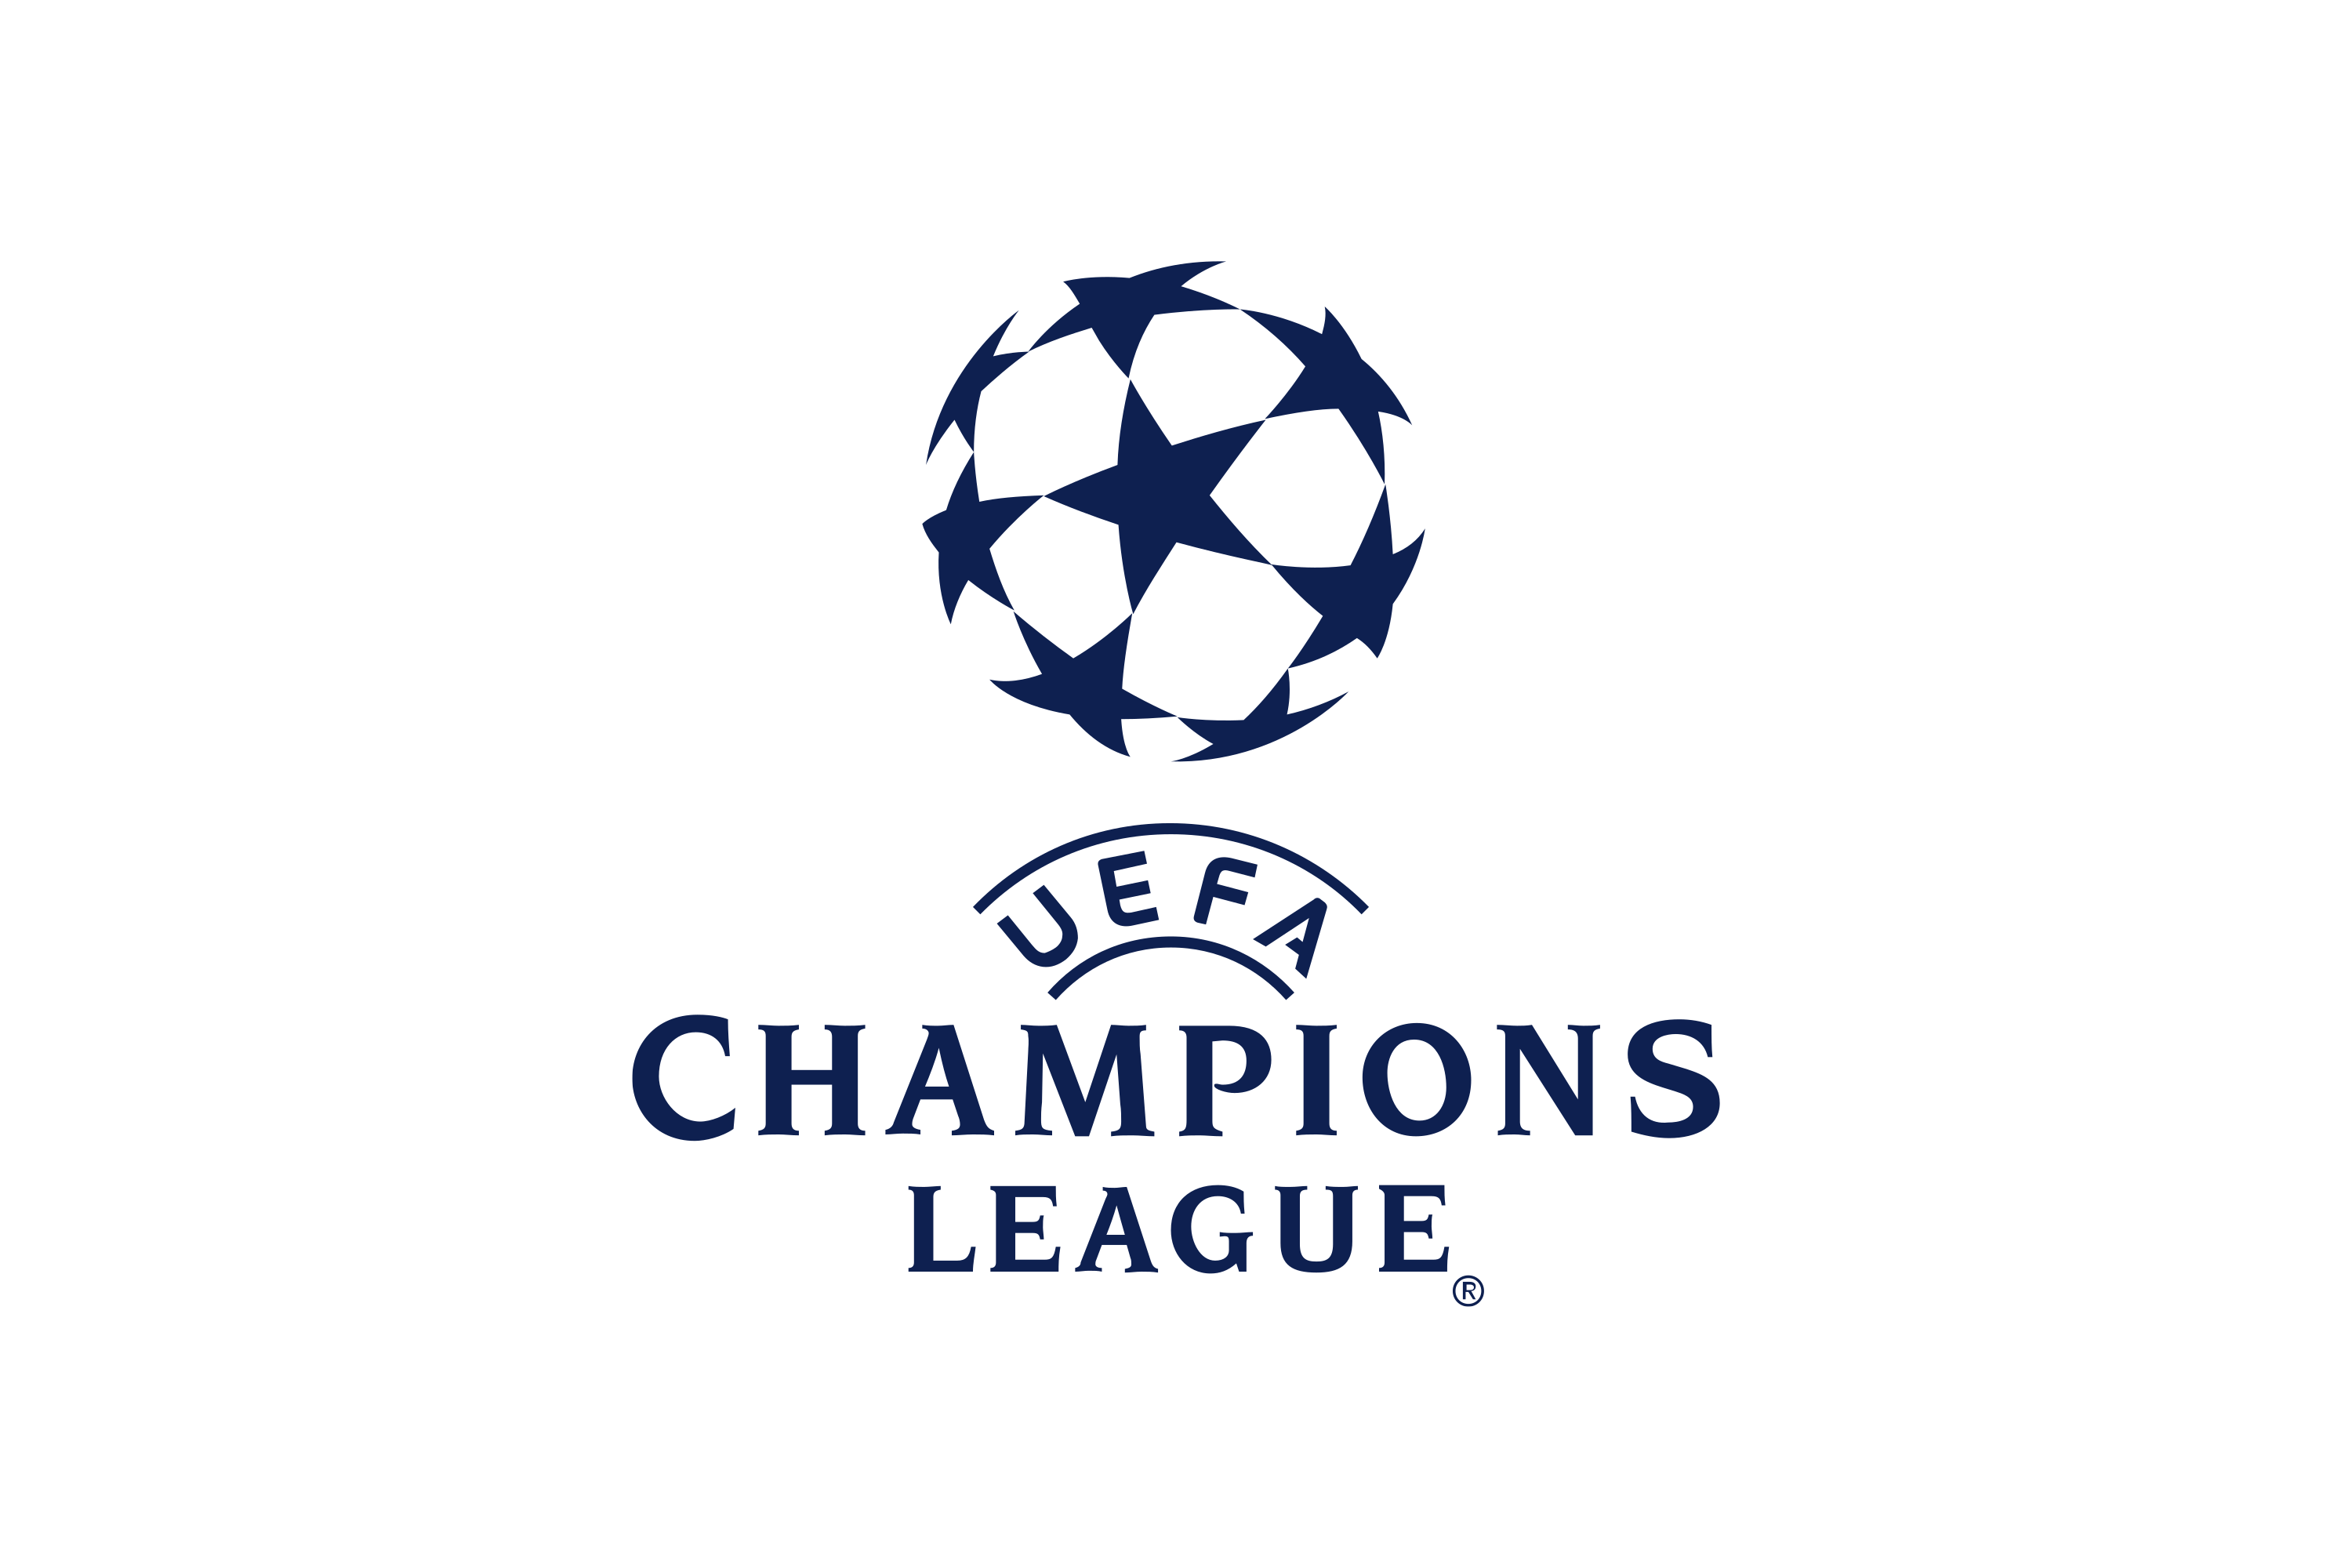 Download Uefa Champions League Ucl European Champion Clubs Cup European Cup Logo In Svg Vector Or Png File Format Logo Wine